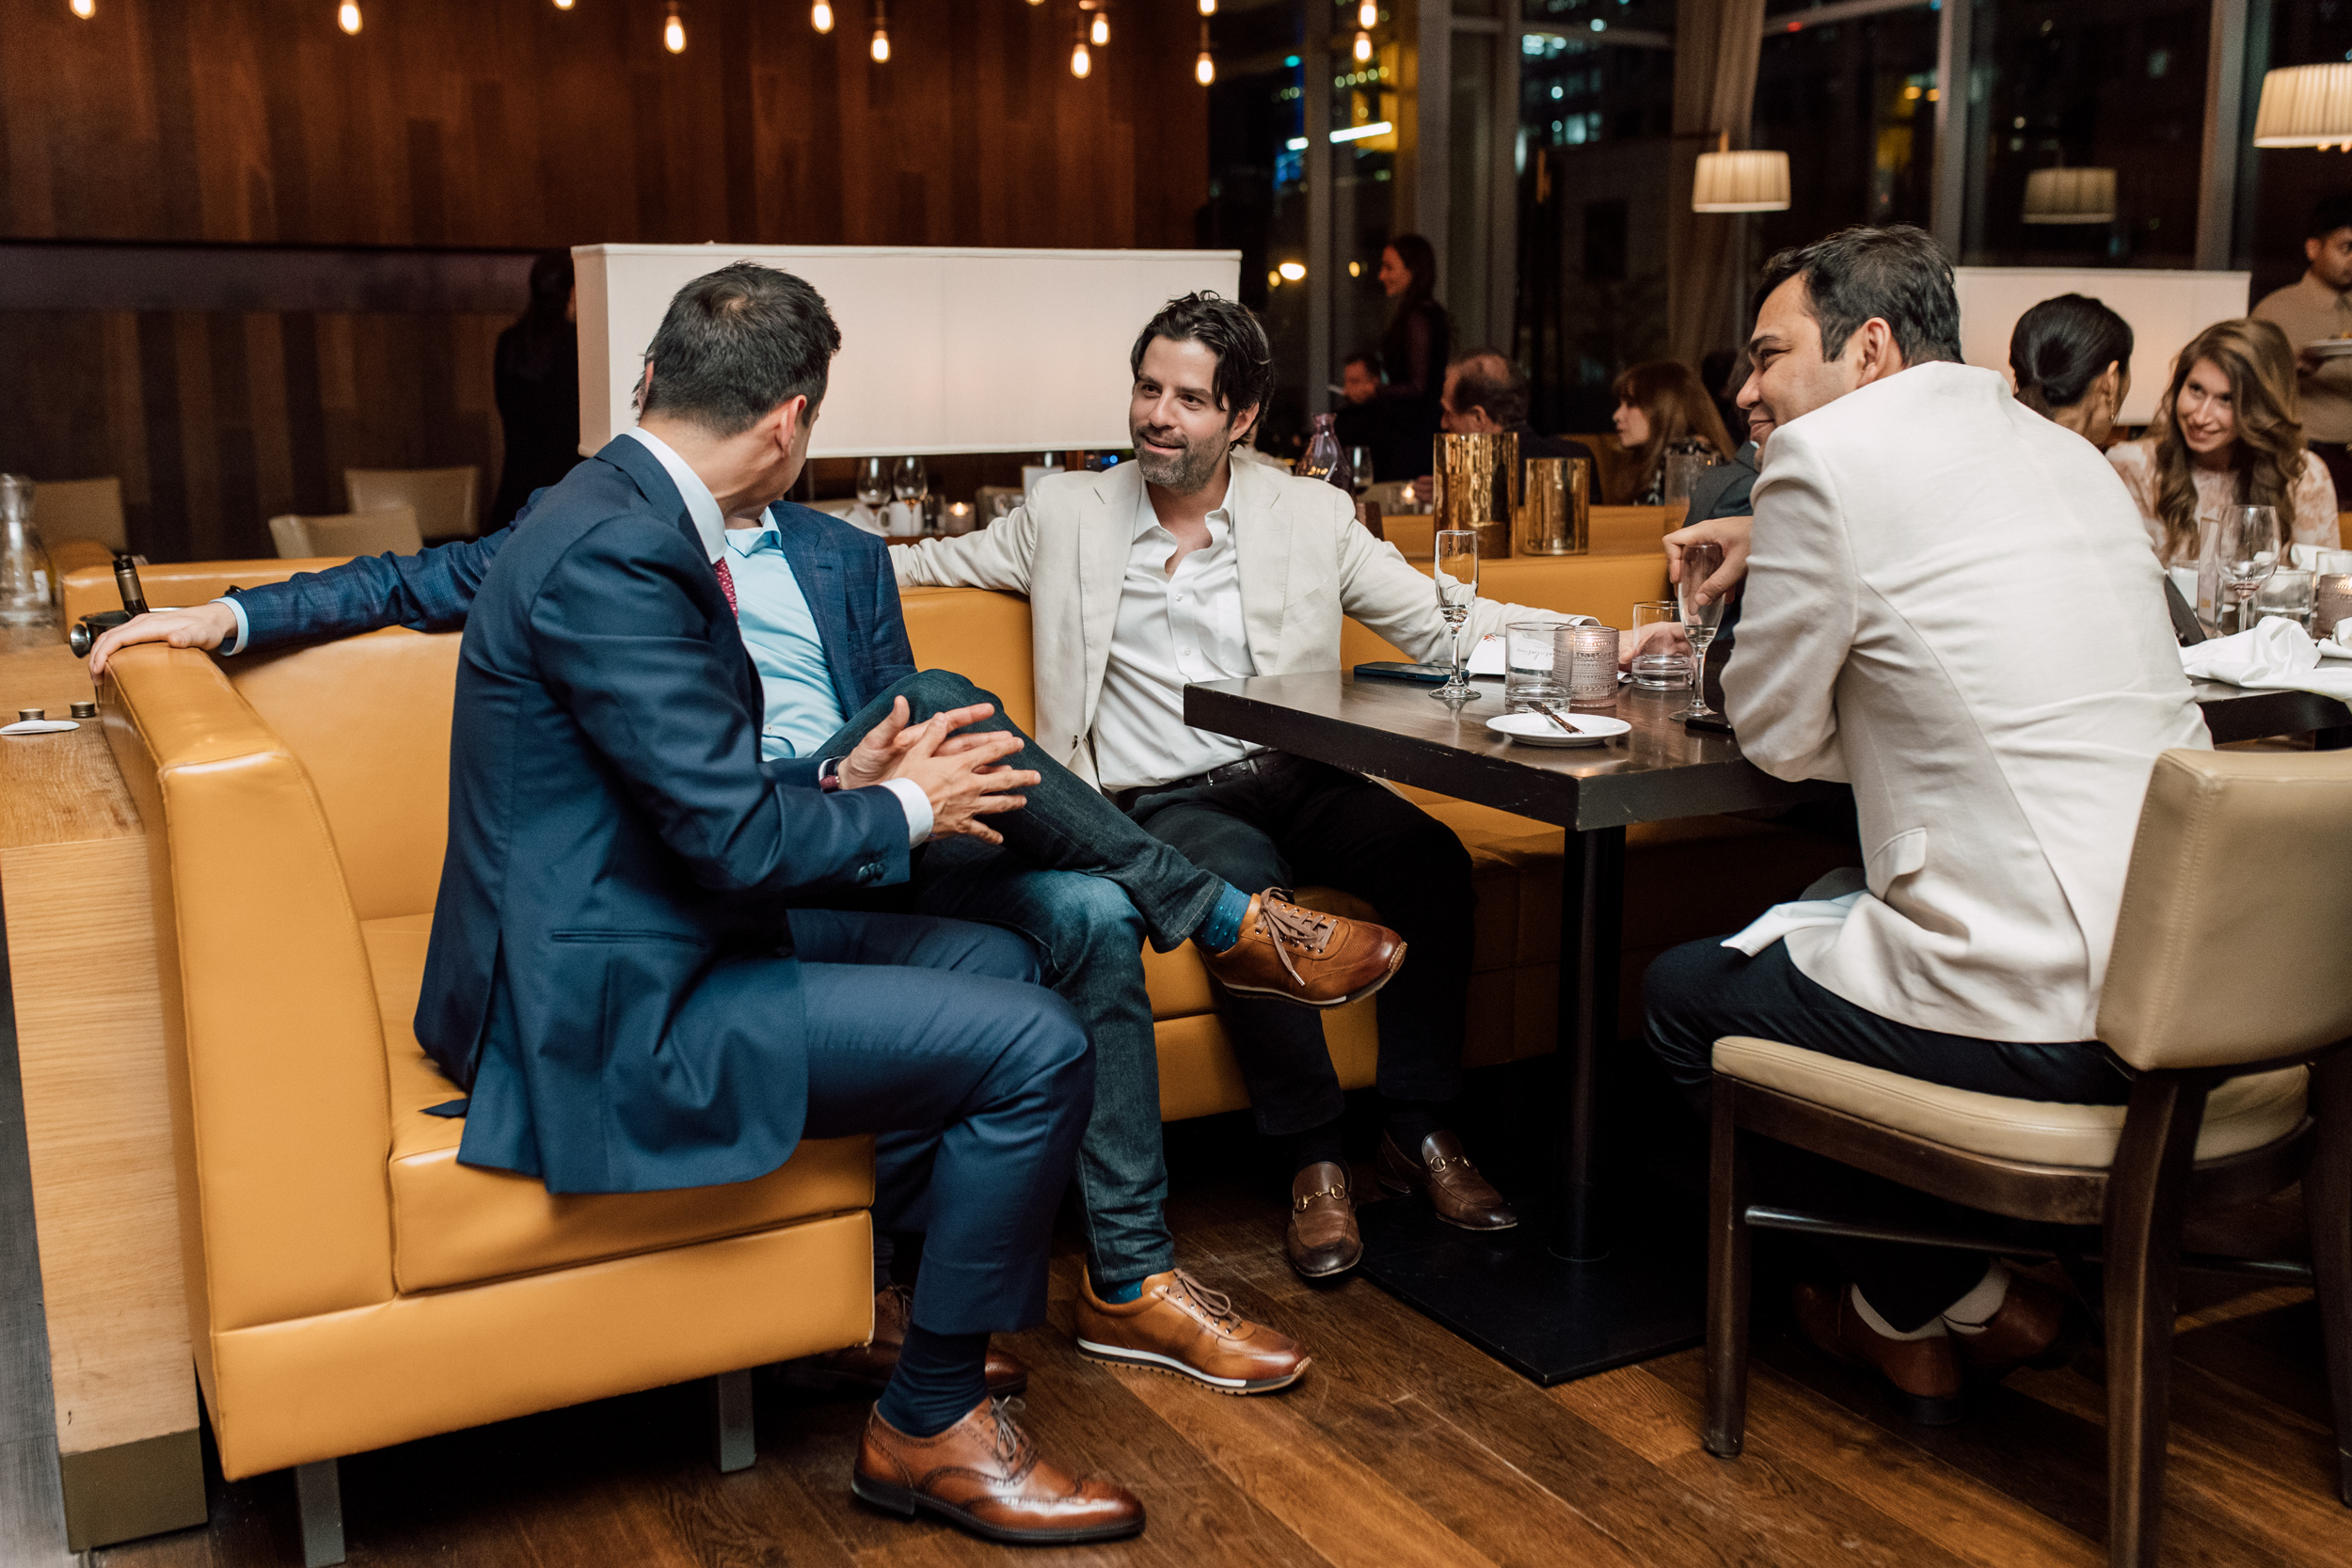 A group of men celebrating their graduation at a table in a restaurant, captured through event photography.